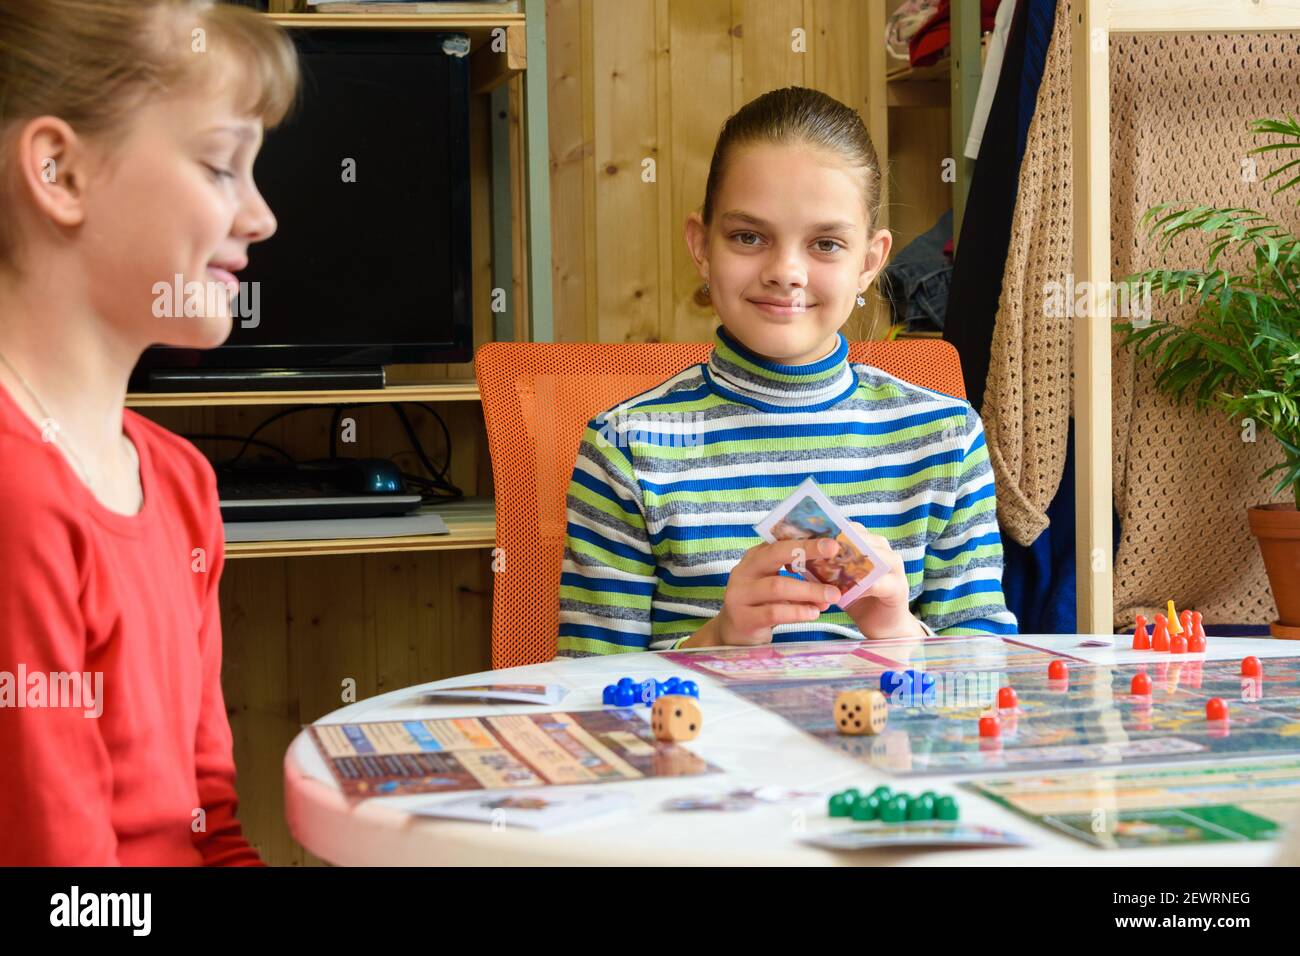 Children in a good mood are playing a board game, one of the girls looked into the frame Stock Photo